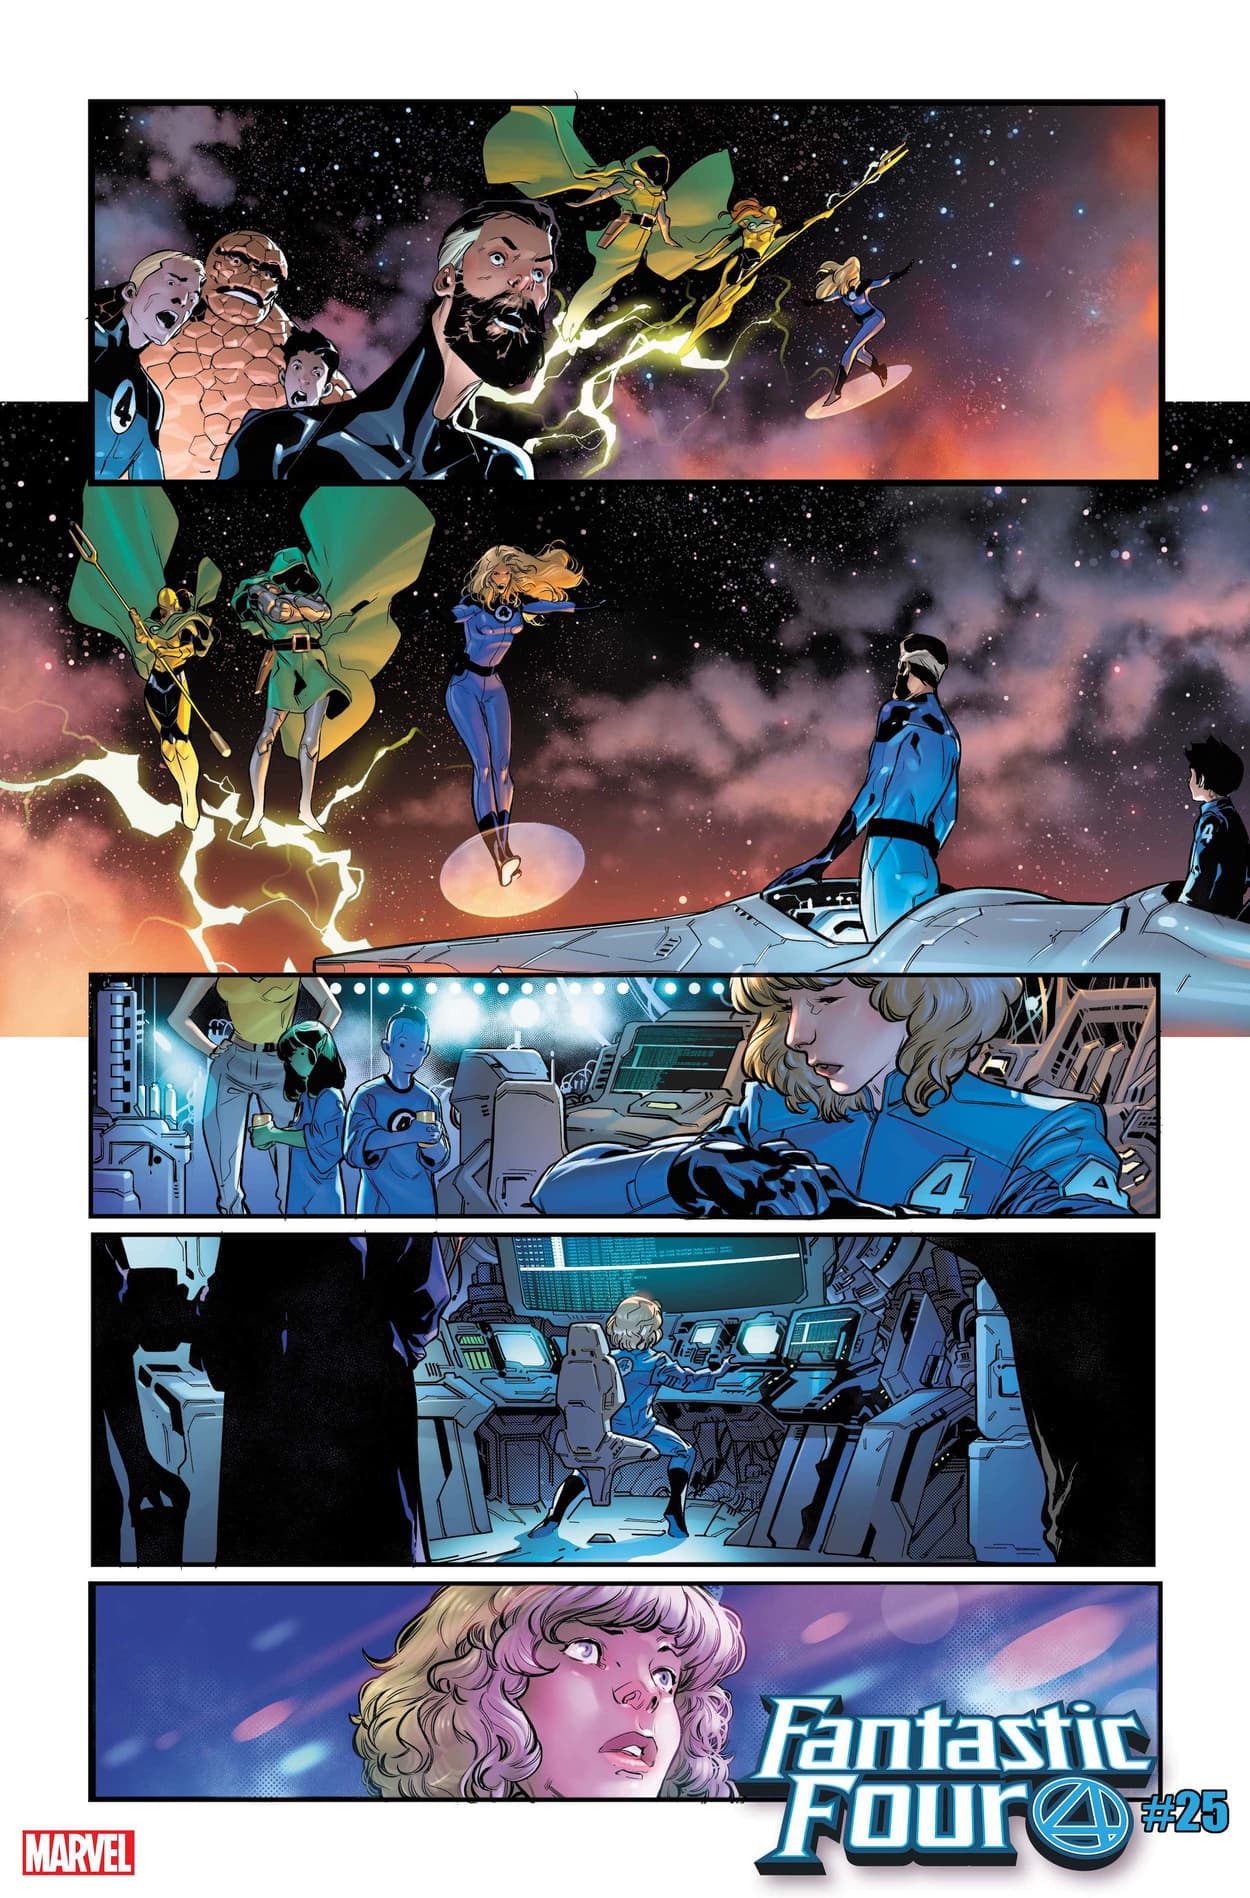 FANTASTIC FOUR #25 preview interiors by R.B. Silva with colors by Jesus Aburtov